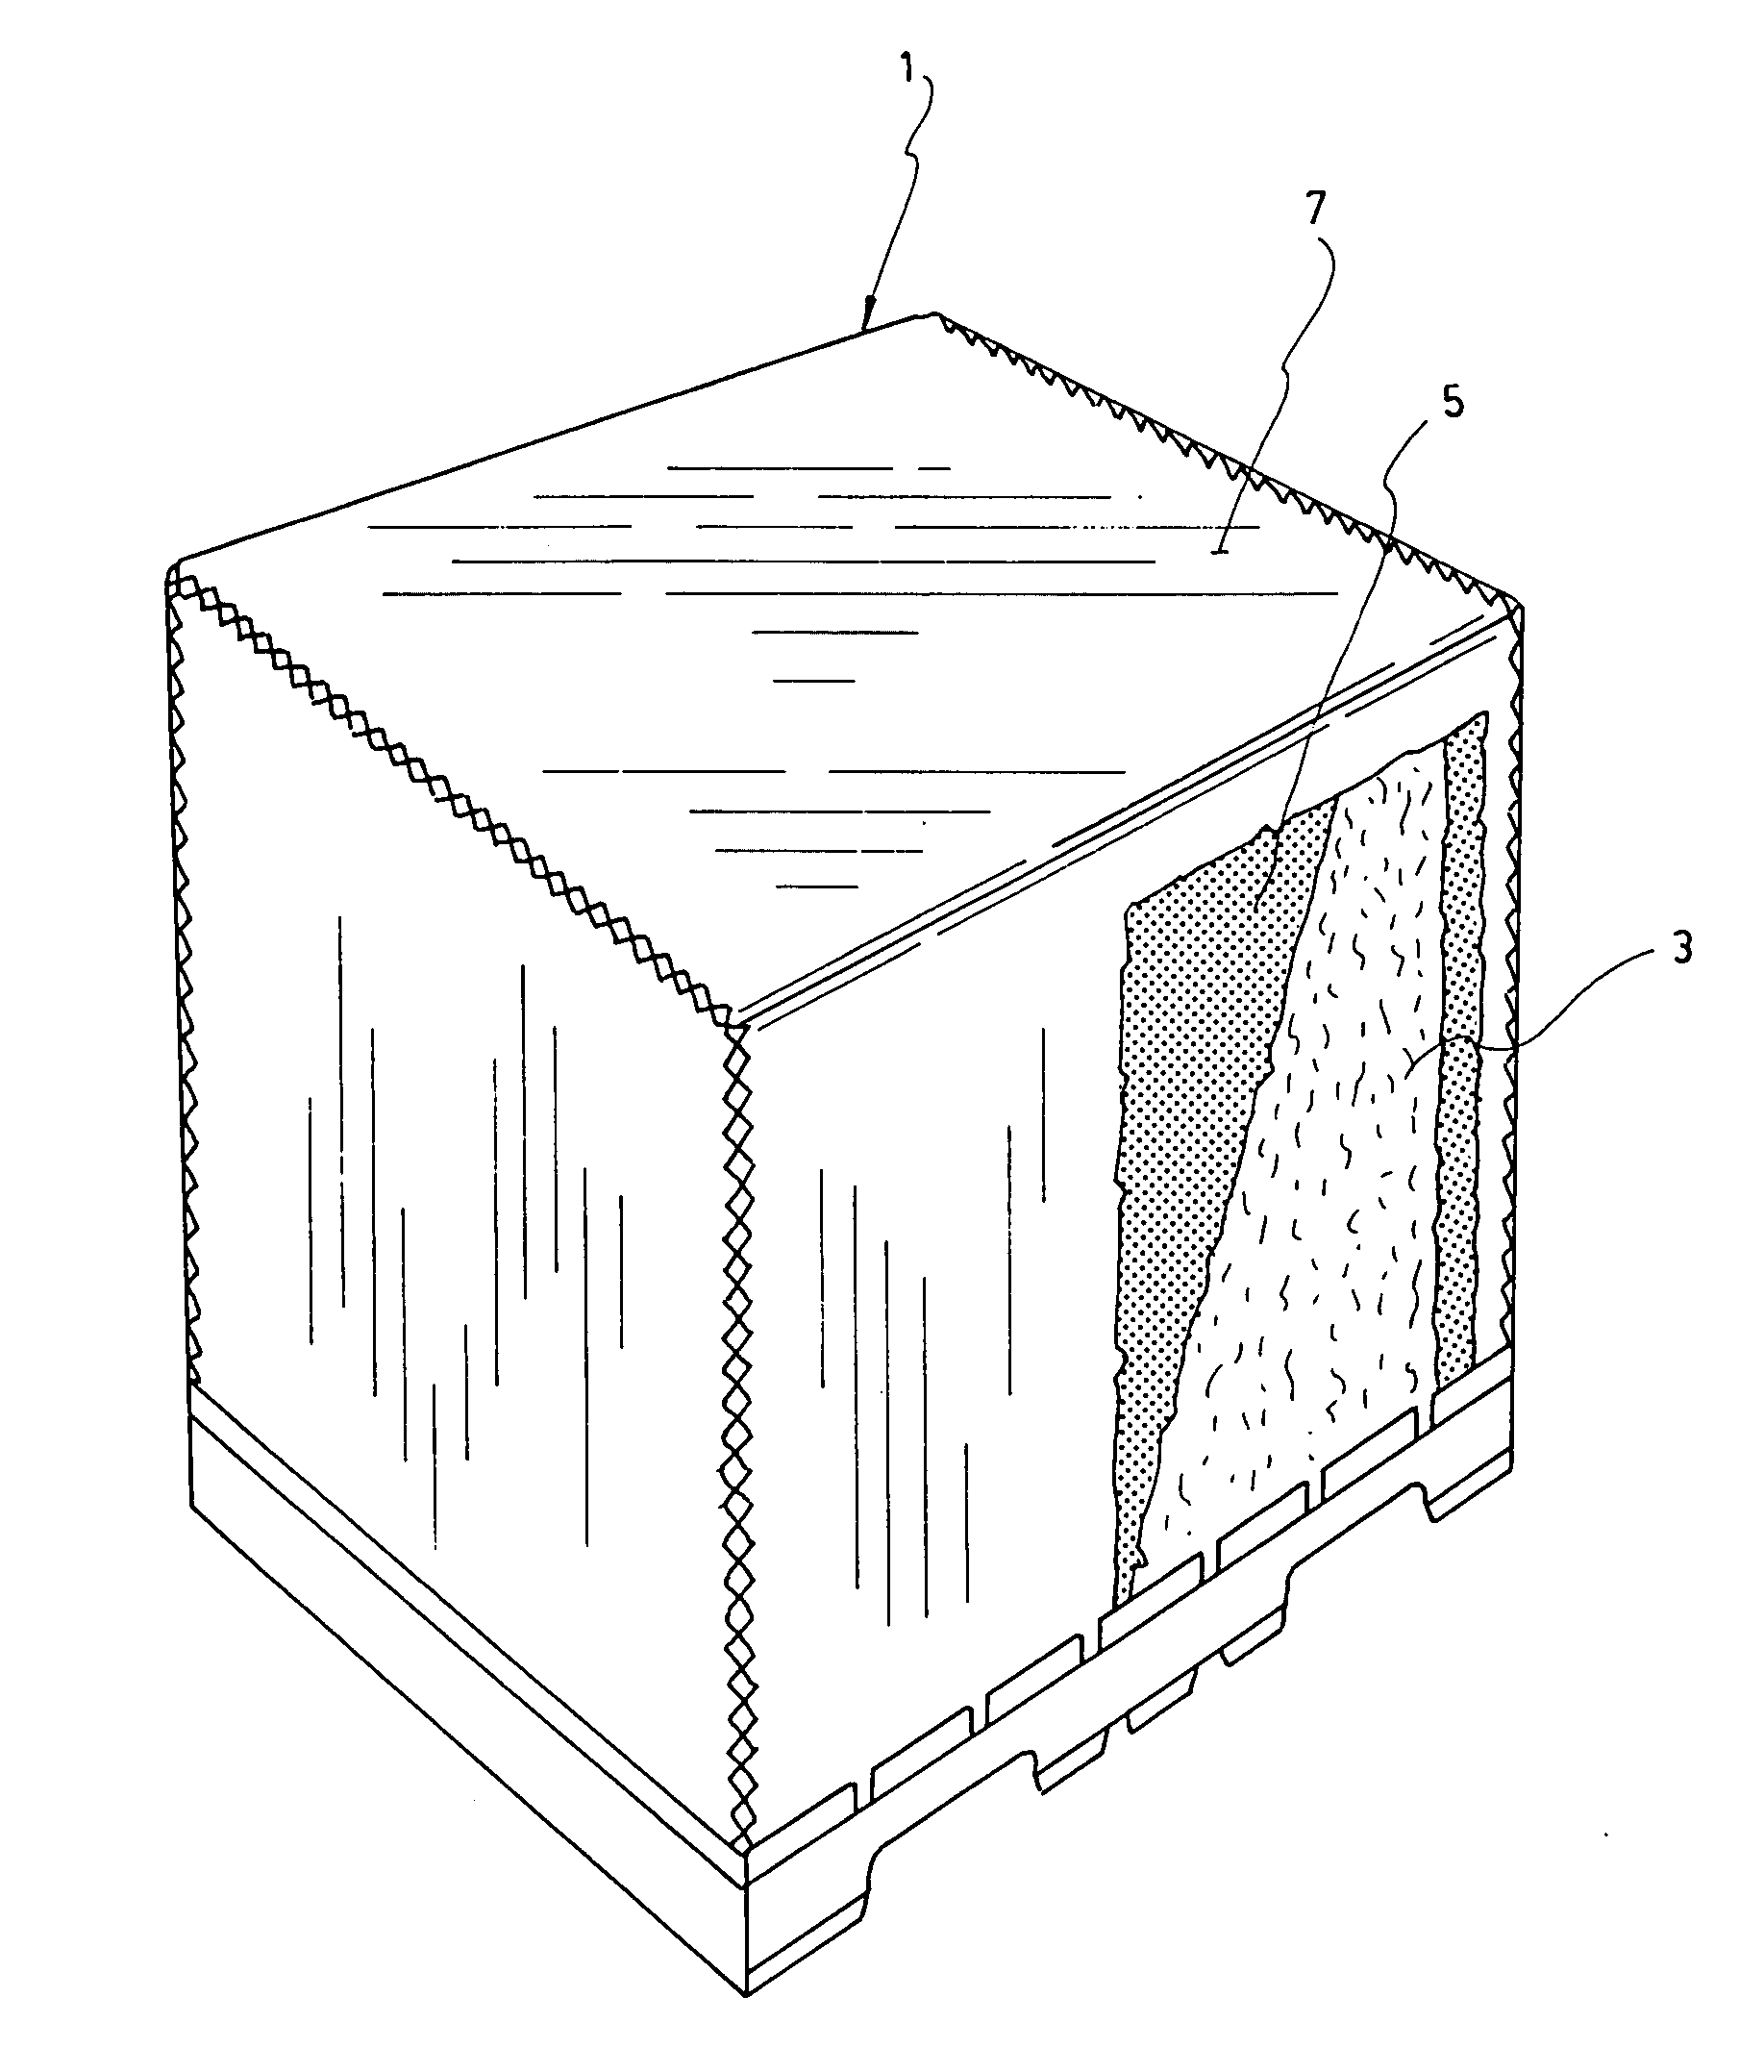 Cover for deflecting light and minimizing heat absorption by a body